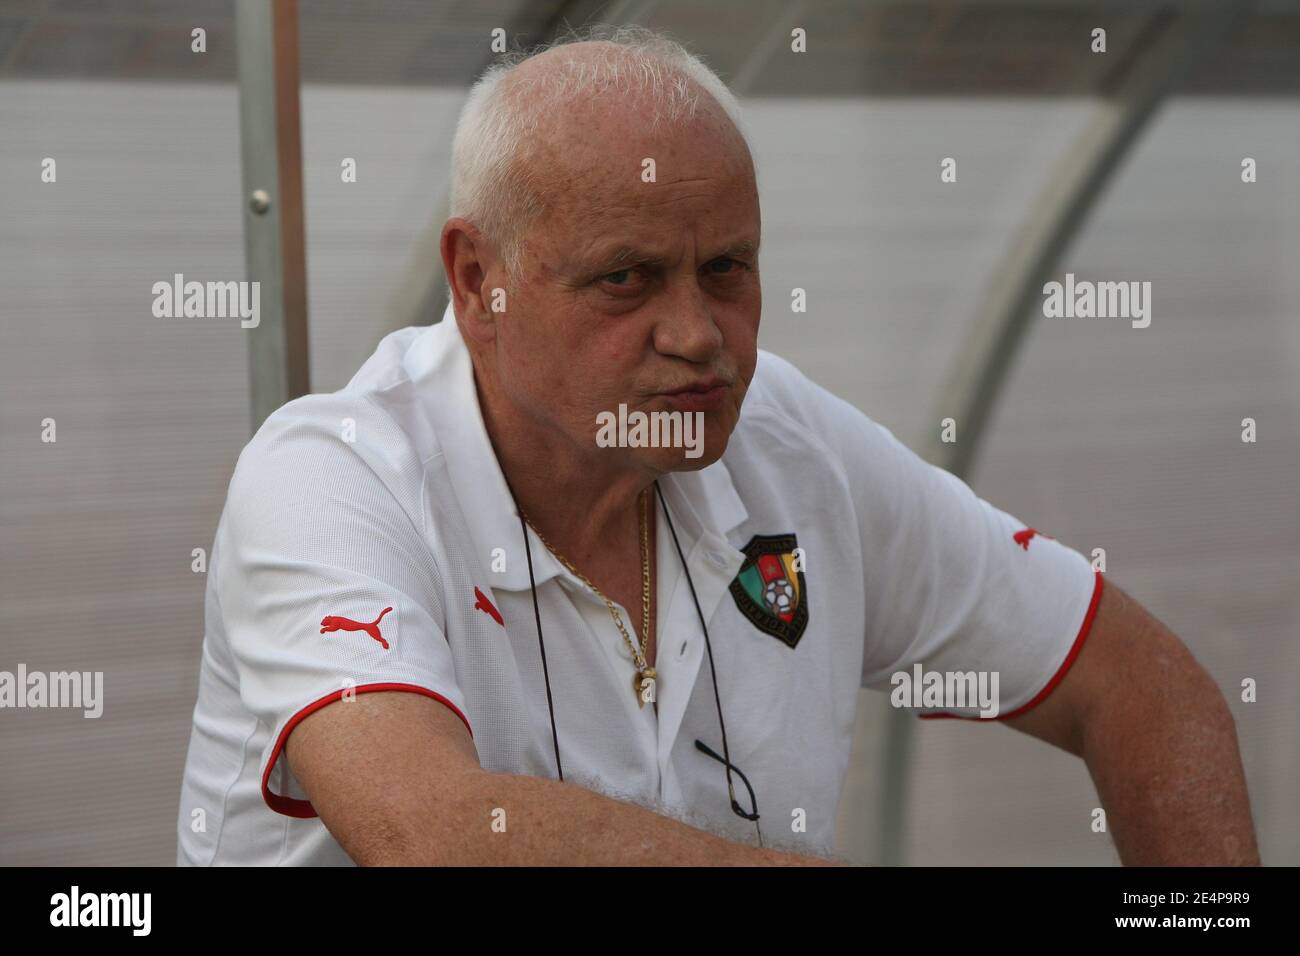 Cameroon's coach Otto Pfister during the African Cup of Nations soccer match, Cameroon vs Zambia in Kumasi, Ghana on January 26, 2008. Cameroon won the match 5-1. Photo by Steeve McMay/Cameleon/ABACAPRESS.COM Stock Photo